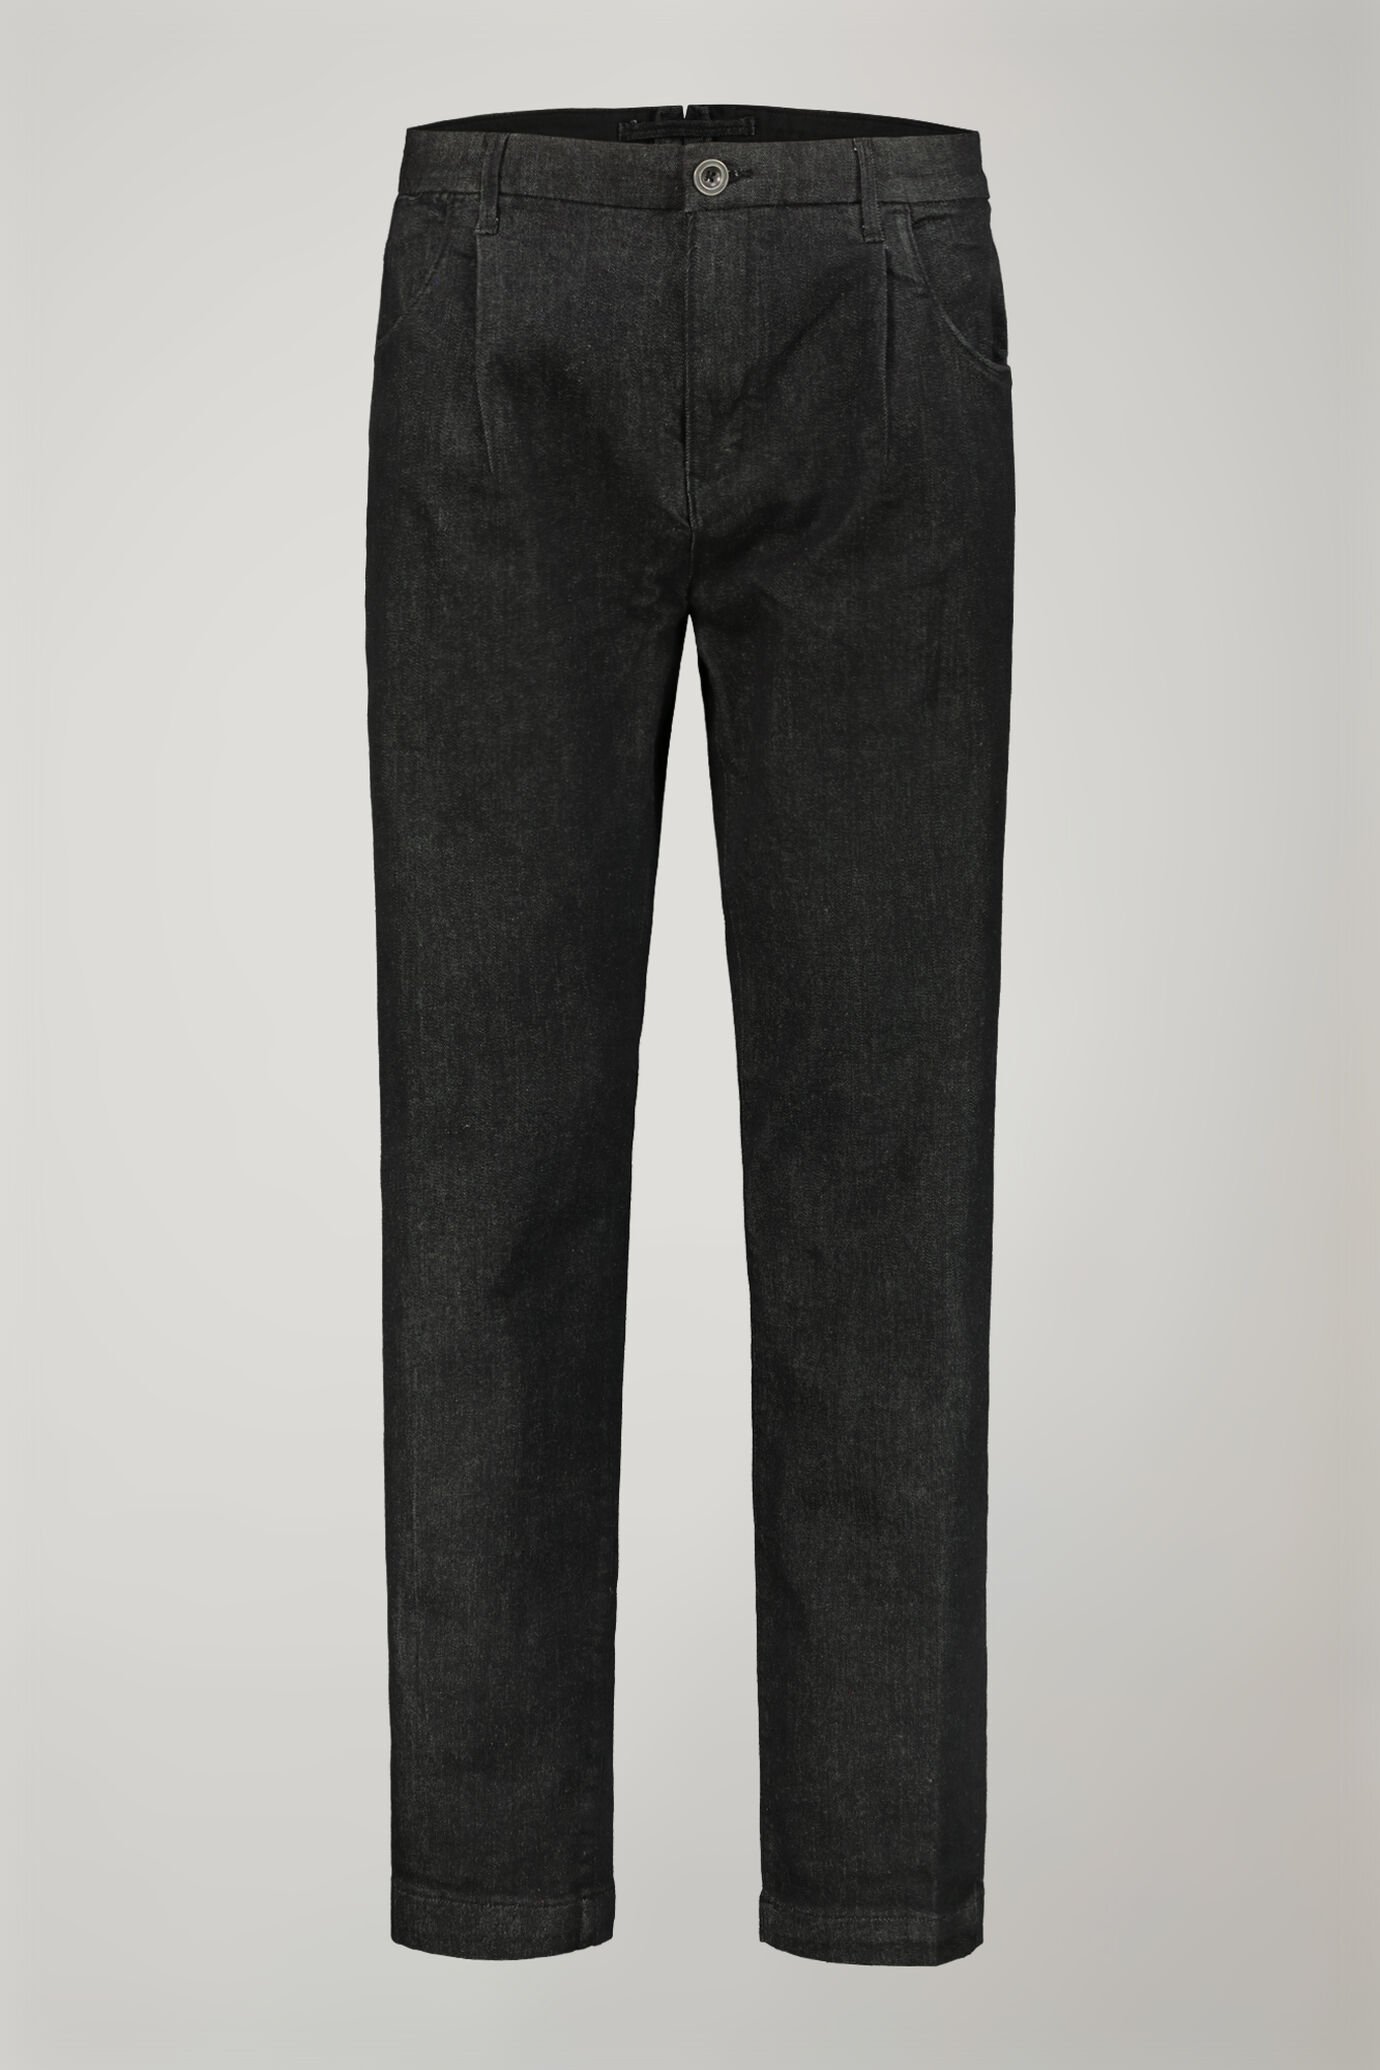 Men's trousers with small dart regular fit denim fabric image number 4